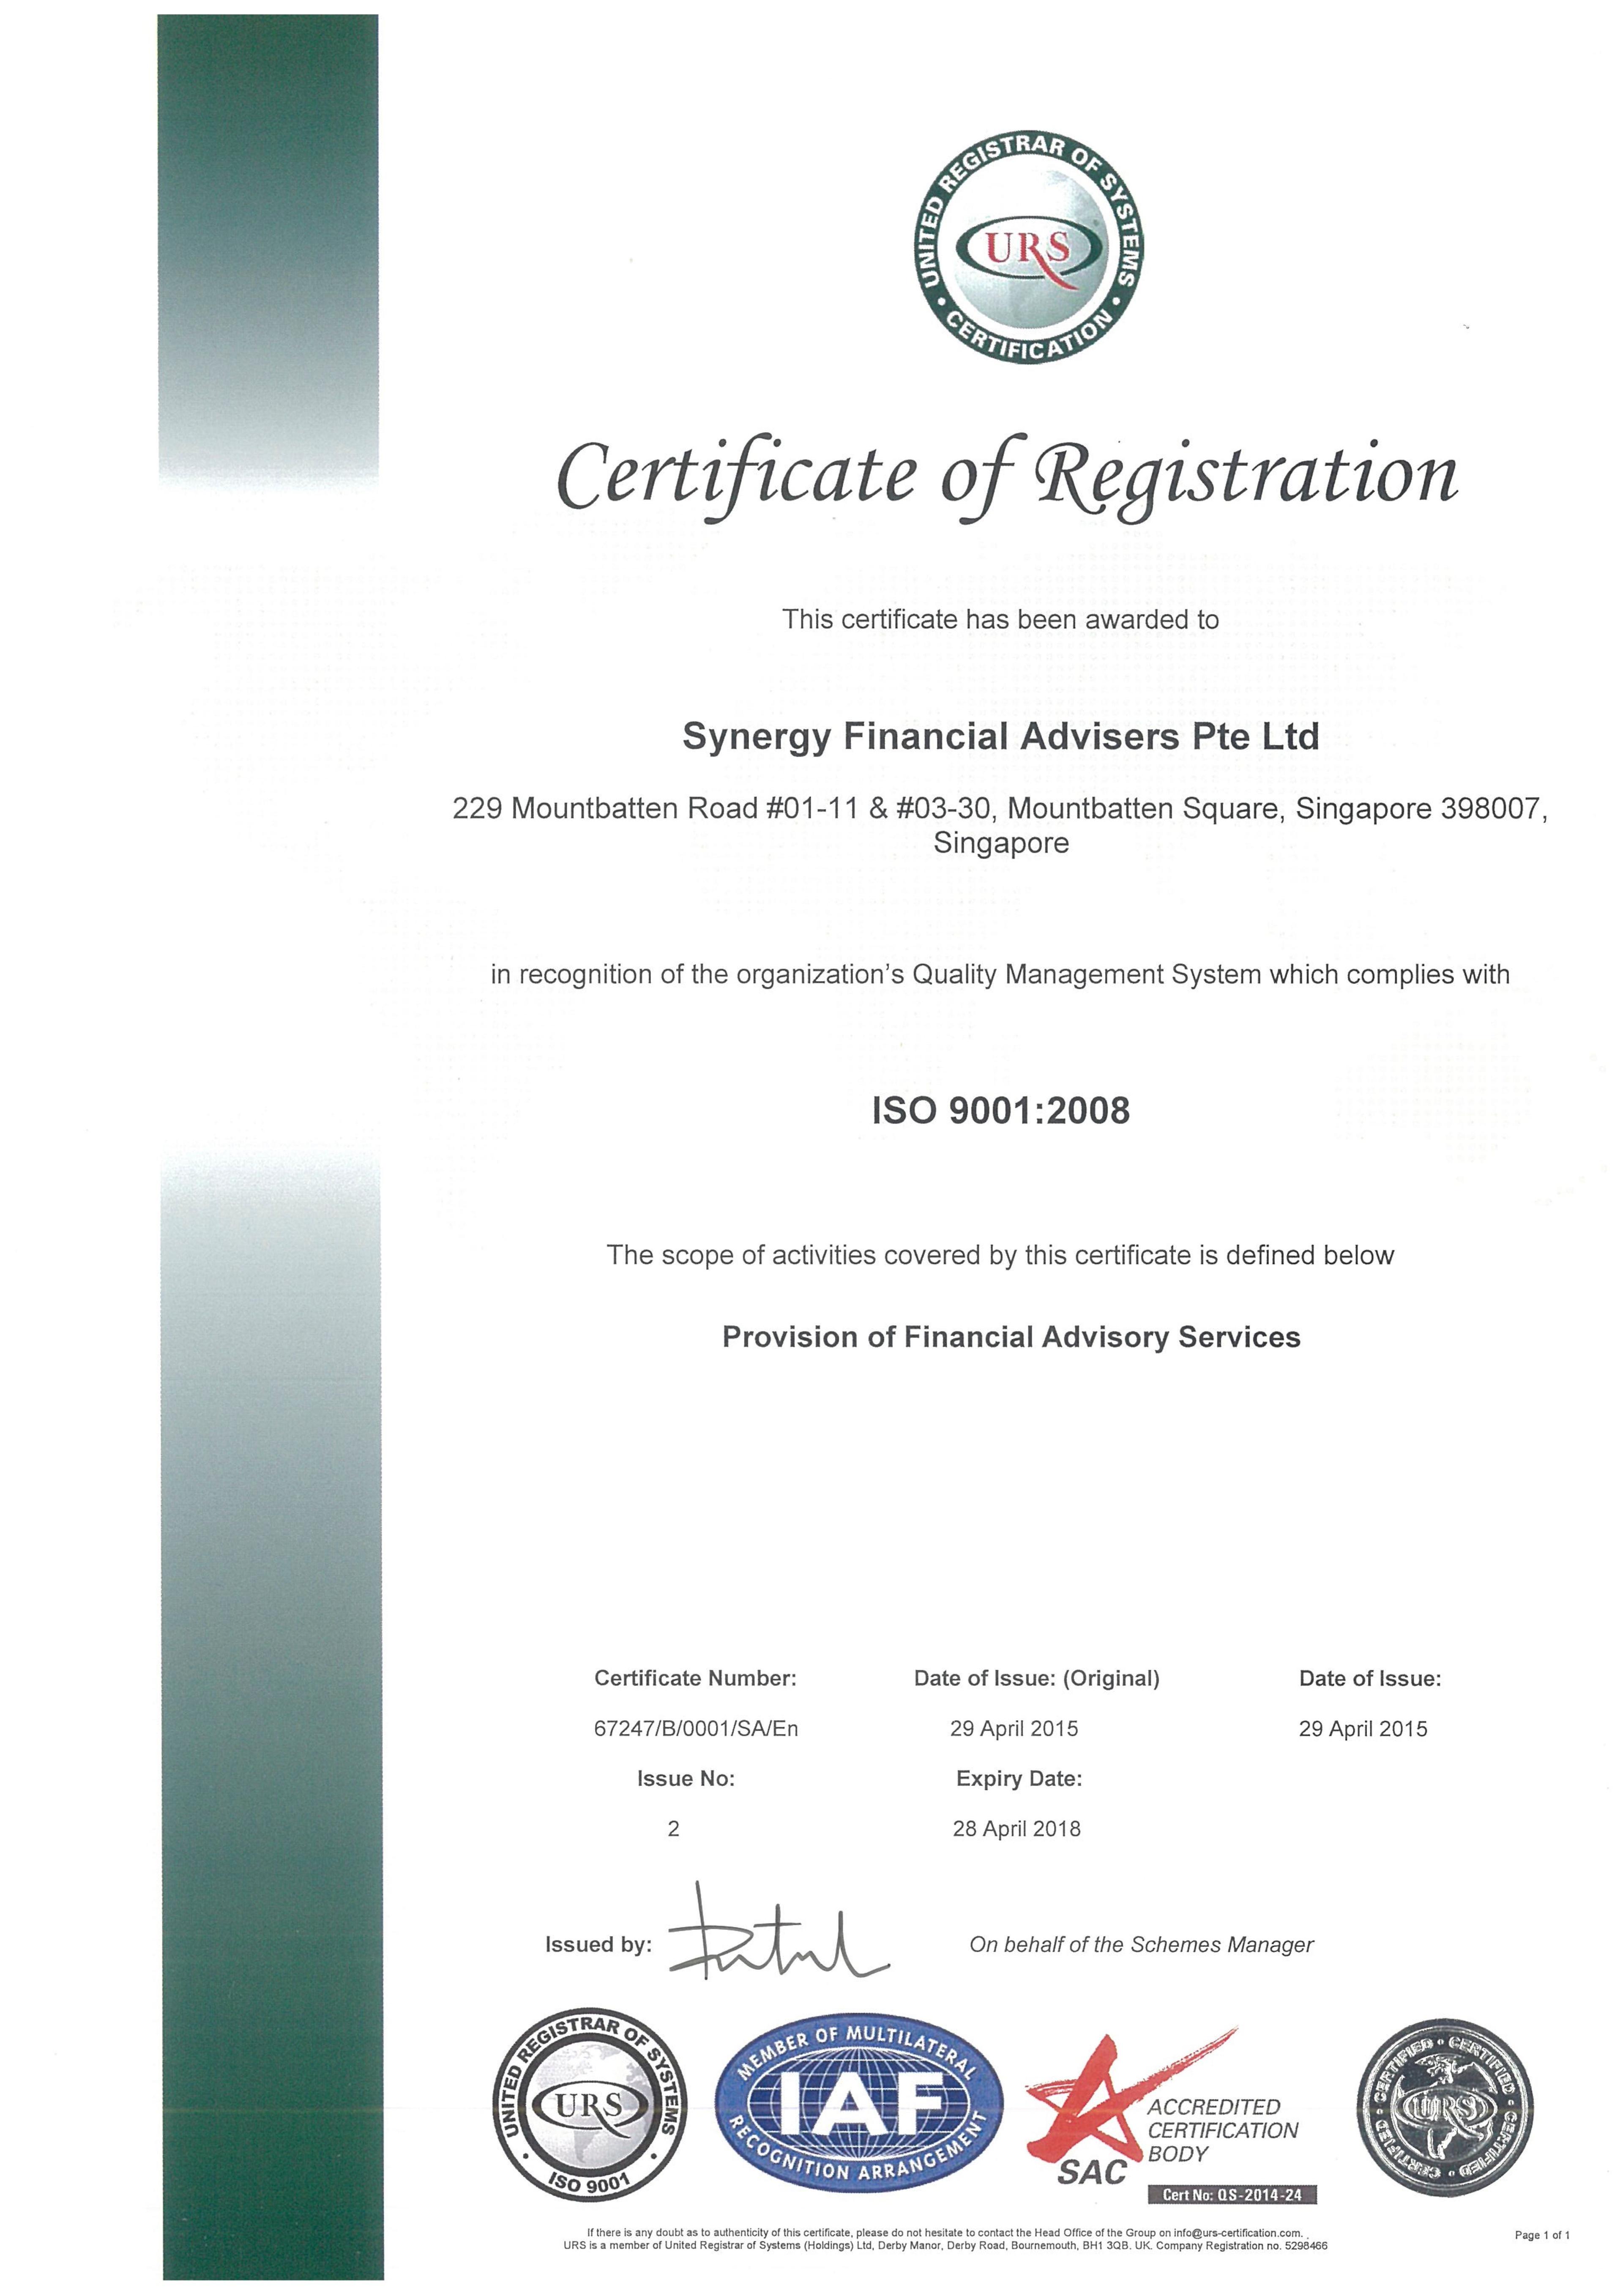 Synergy Financial Advisers are now ISO 9001:2008 certified!